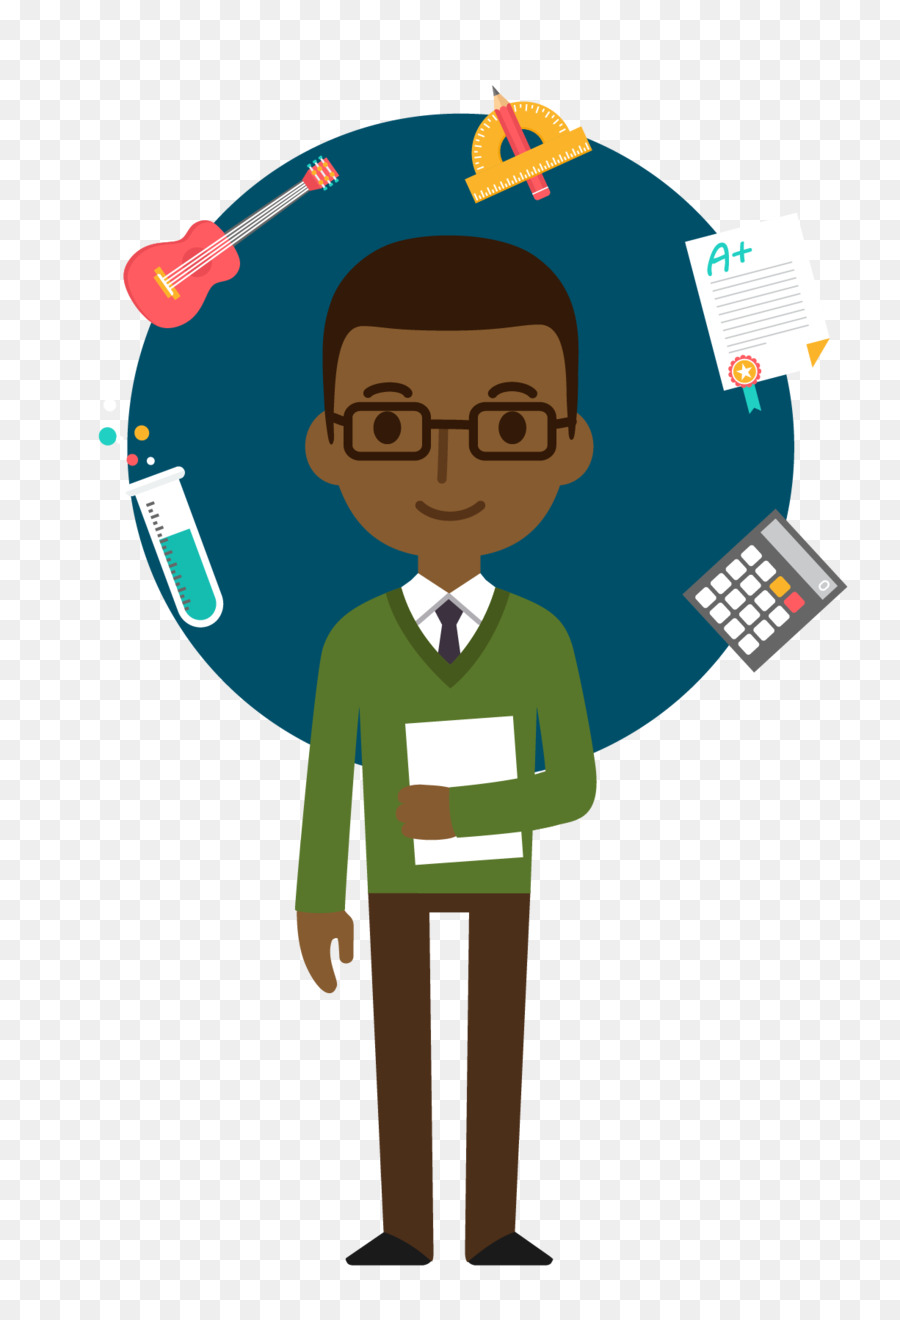 College Student clipart - Student, Learning, School, transparent 